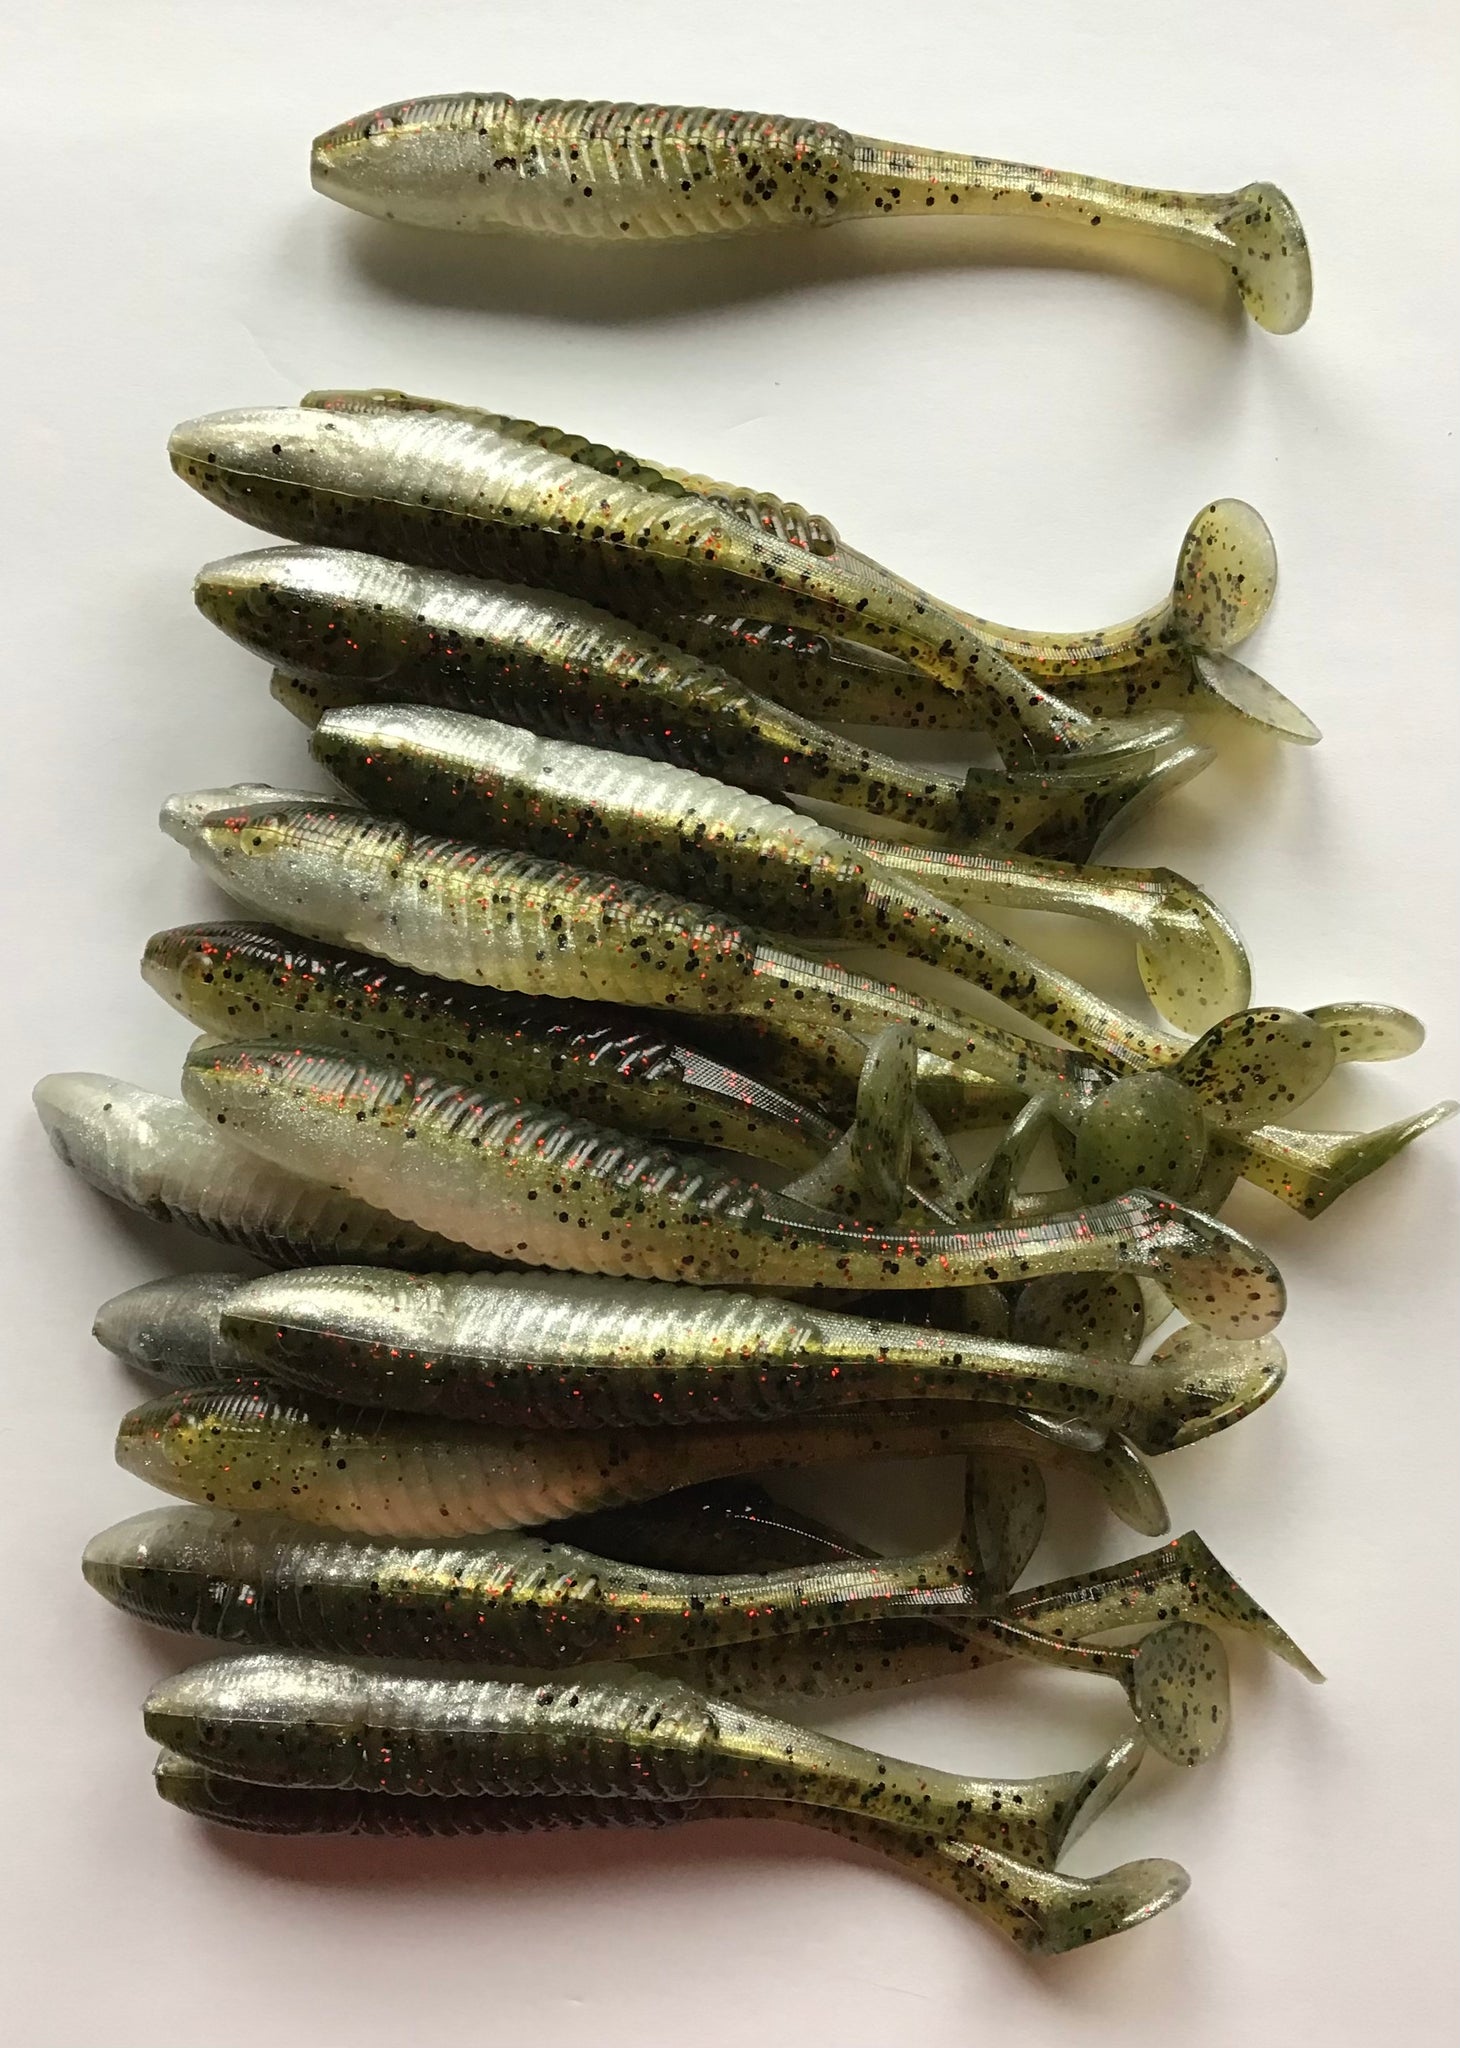 Fishing Lures for Bass Soft Swimbaits with Paddle Tail Soft